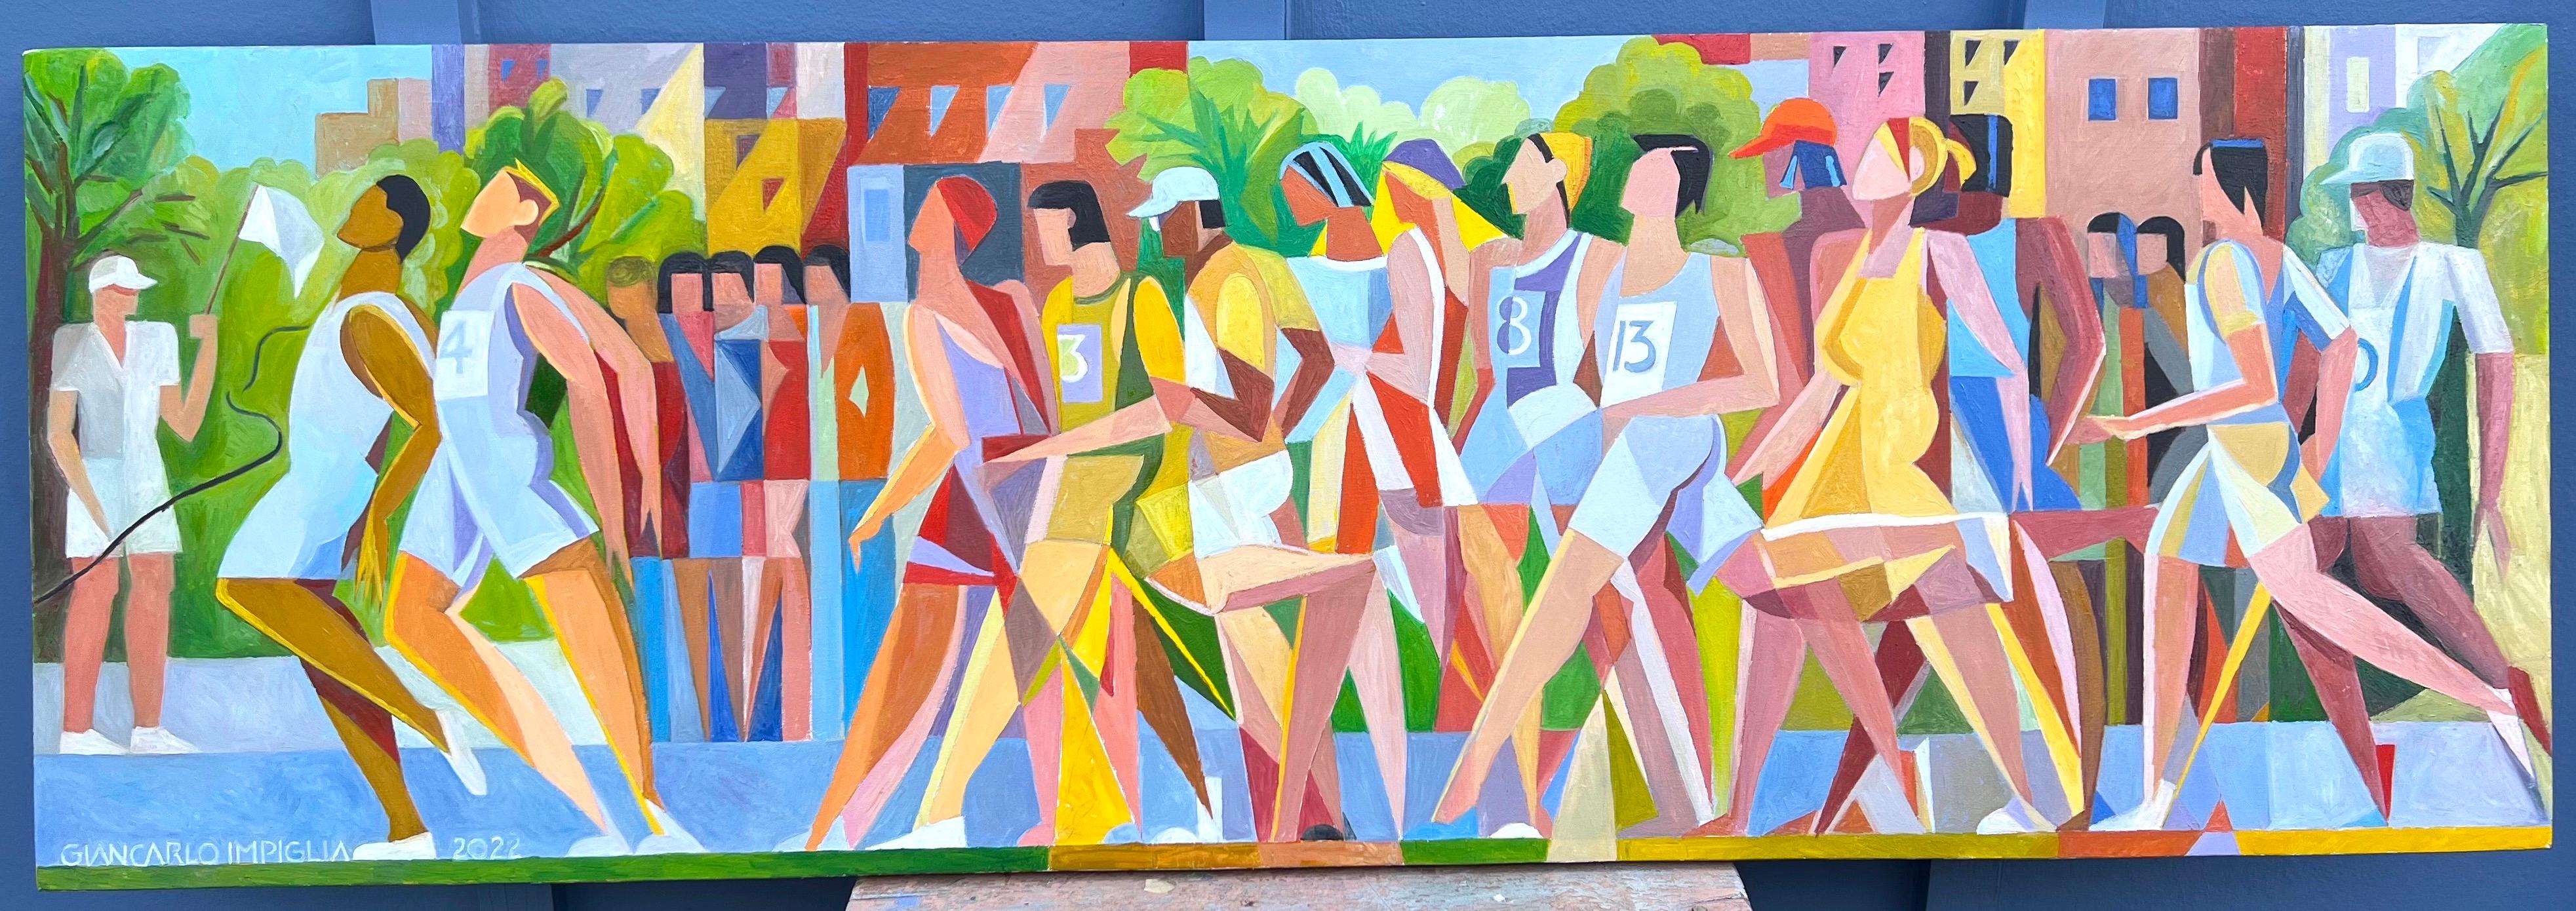 Dynamic cubist style oil painting "Marathon" runners and Olympics 